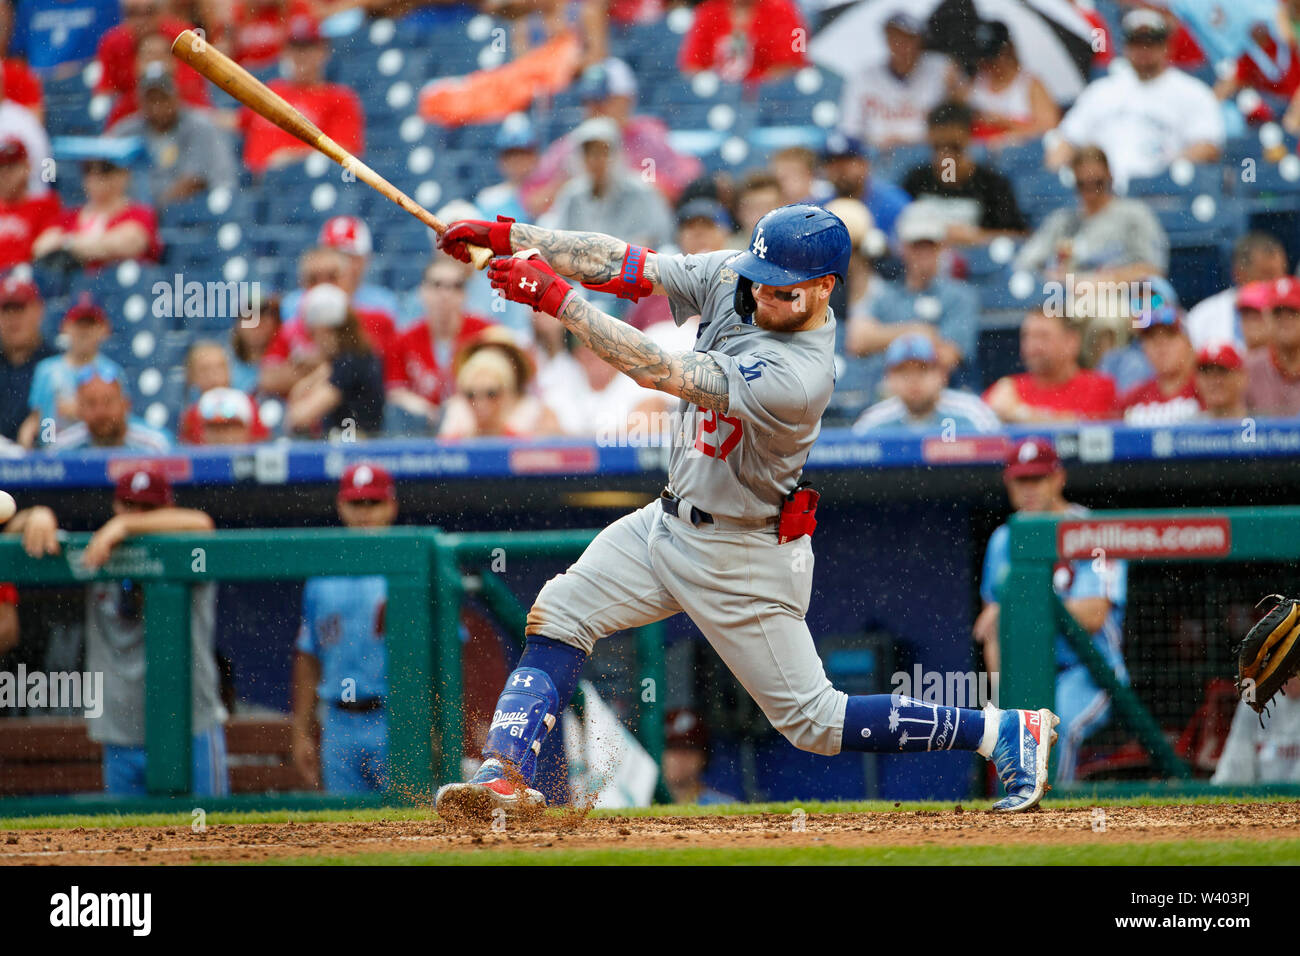 Philadelphia, Pennsylvania, USA. 18th July, 2019. Los Angeles Dodgers center fielder Alex Verdugo (27) in action during the MLB game between the Los Angeles Dodgers and Philadelphia Phillies at Citizens Bank Park in Philadelphia, Pennsylvania. Christopher Szagola/CSM/Alamy Live News Stock Photo